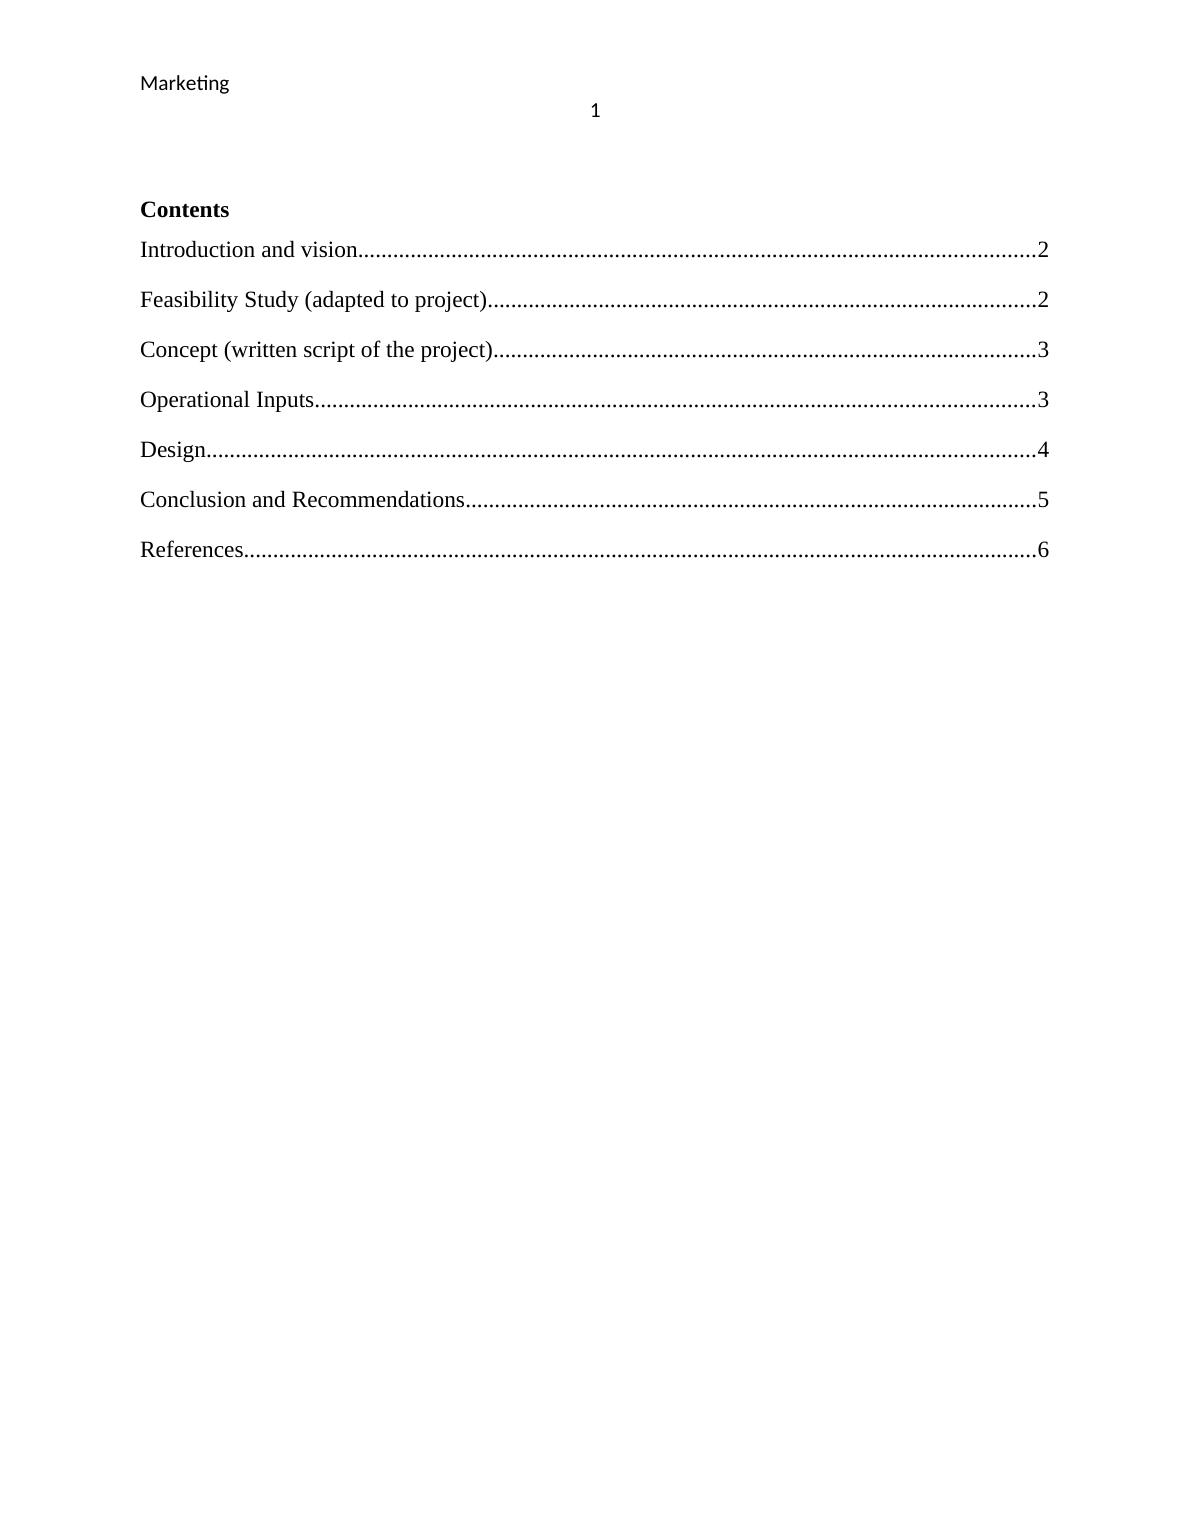 Hospitality Property Services and Management Assignment 2022_2